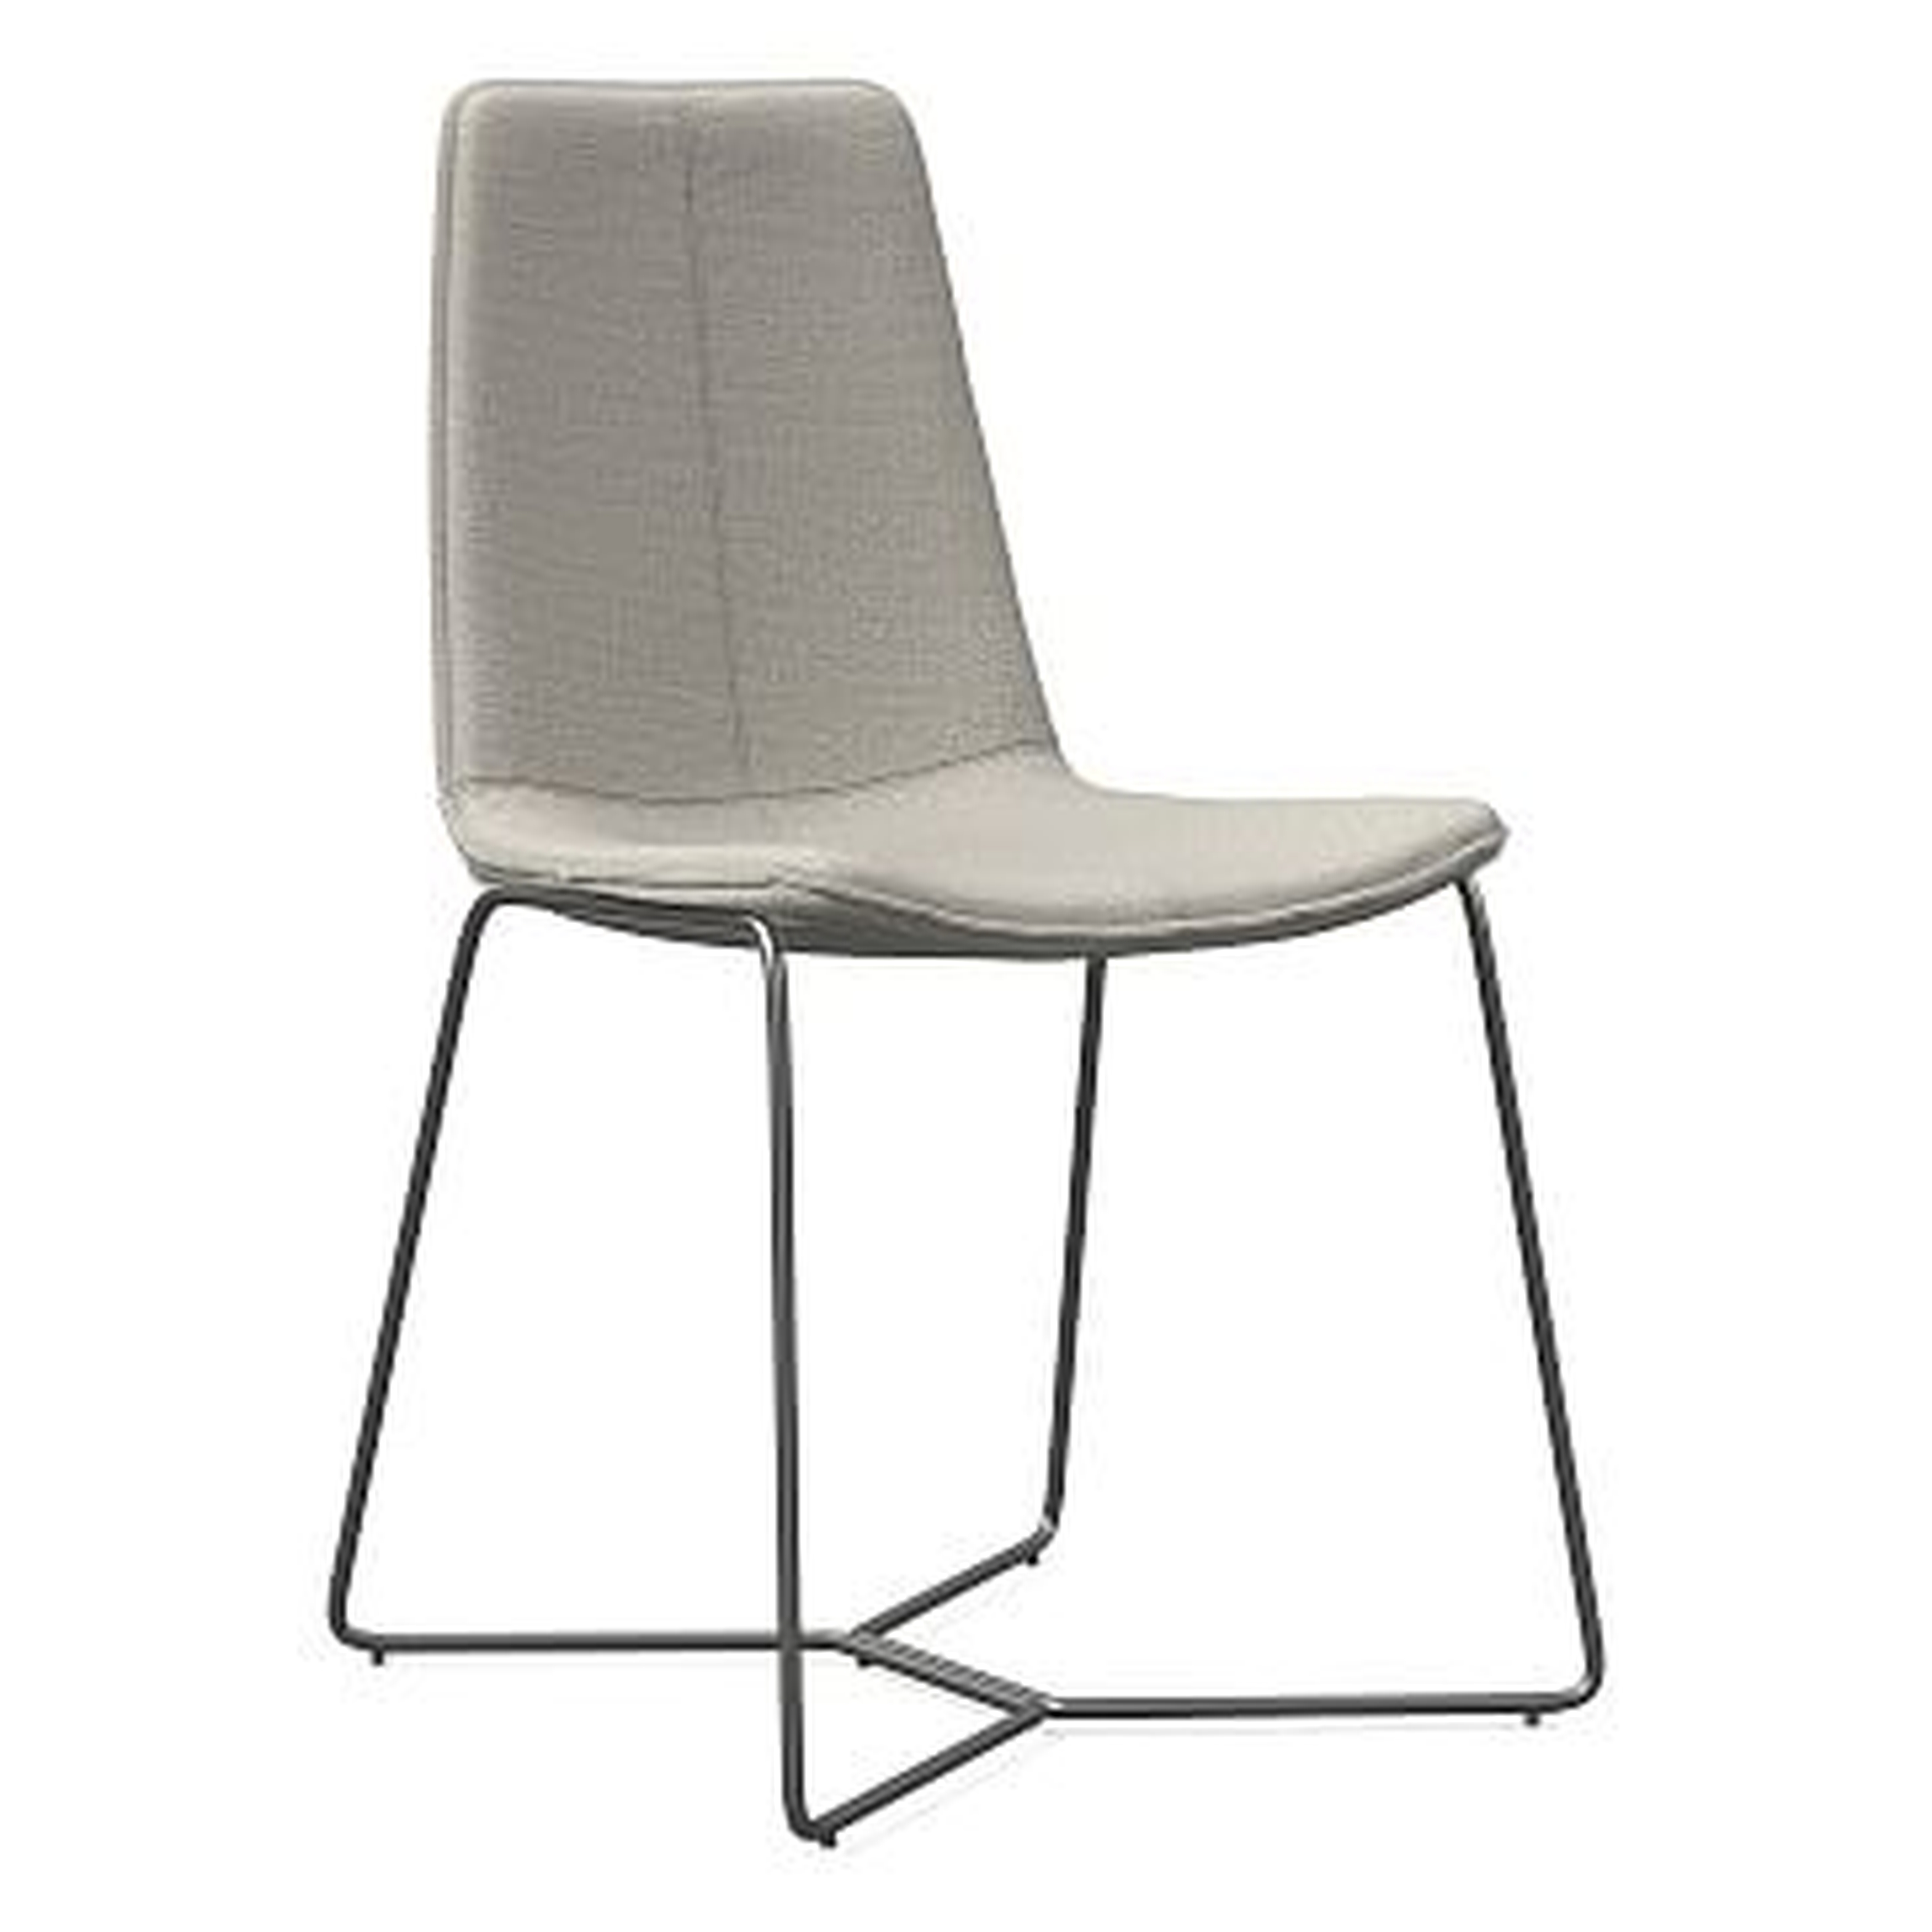 Slope Dining Chair, Charcoal Leg, Basket Slub, Feather Gray, Charcoal - West Elm